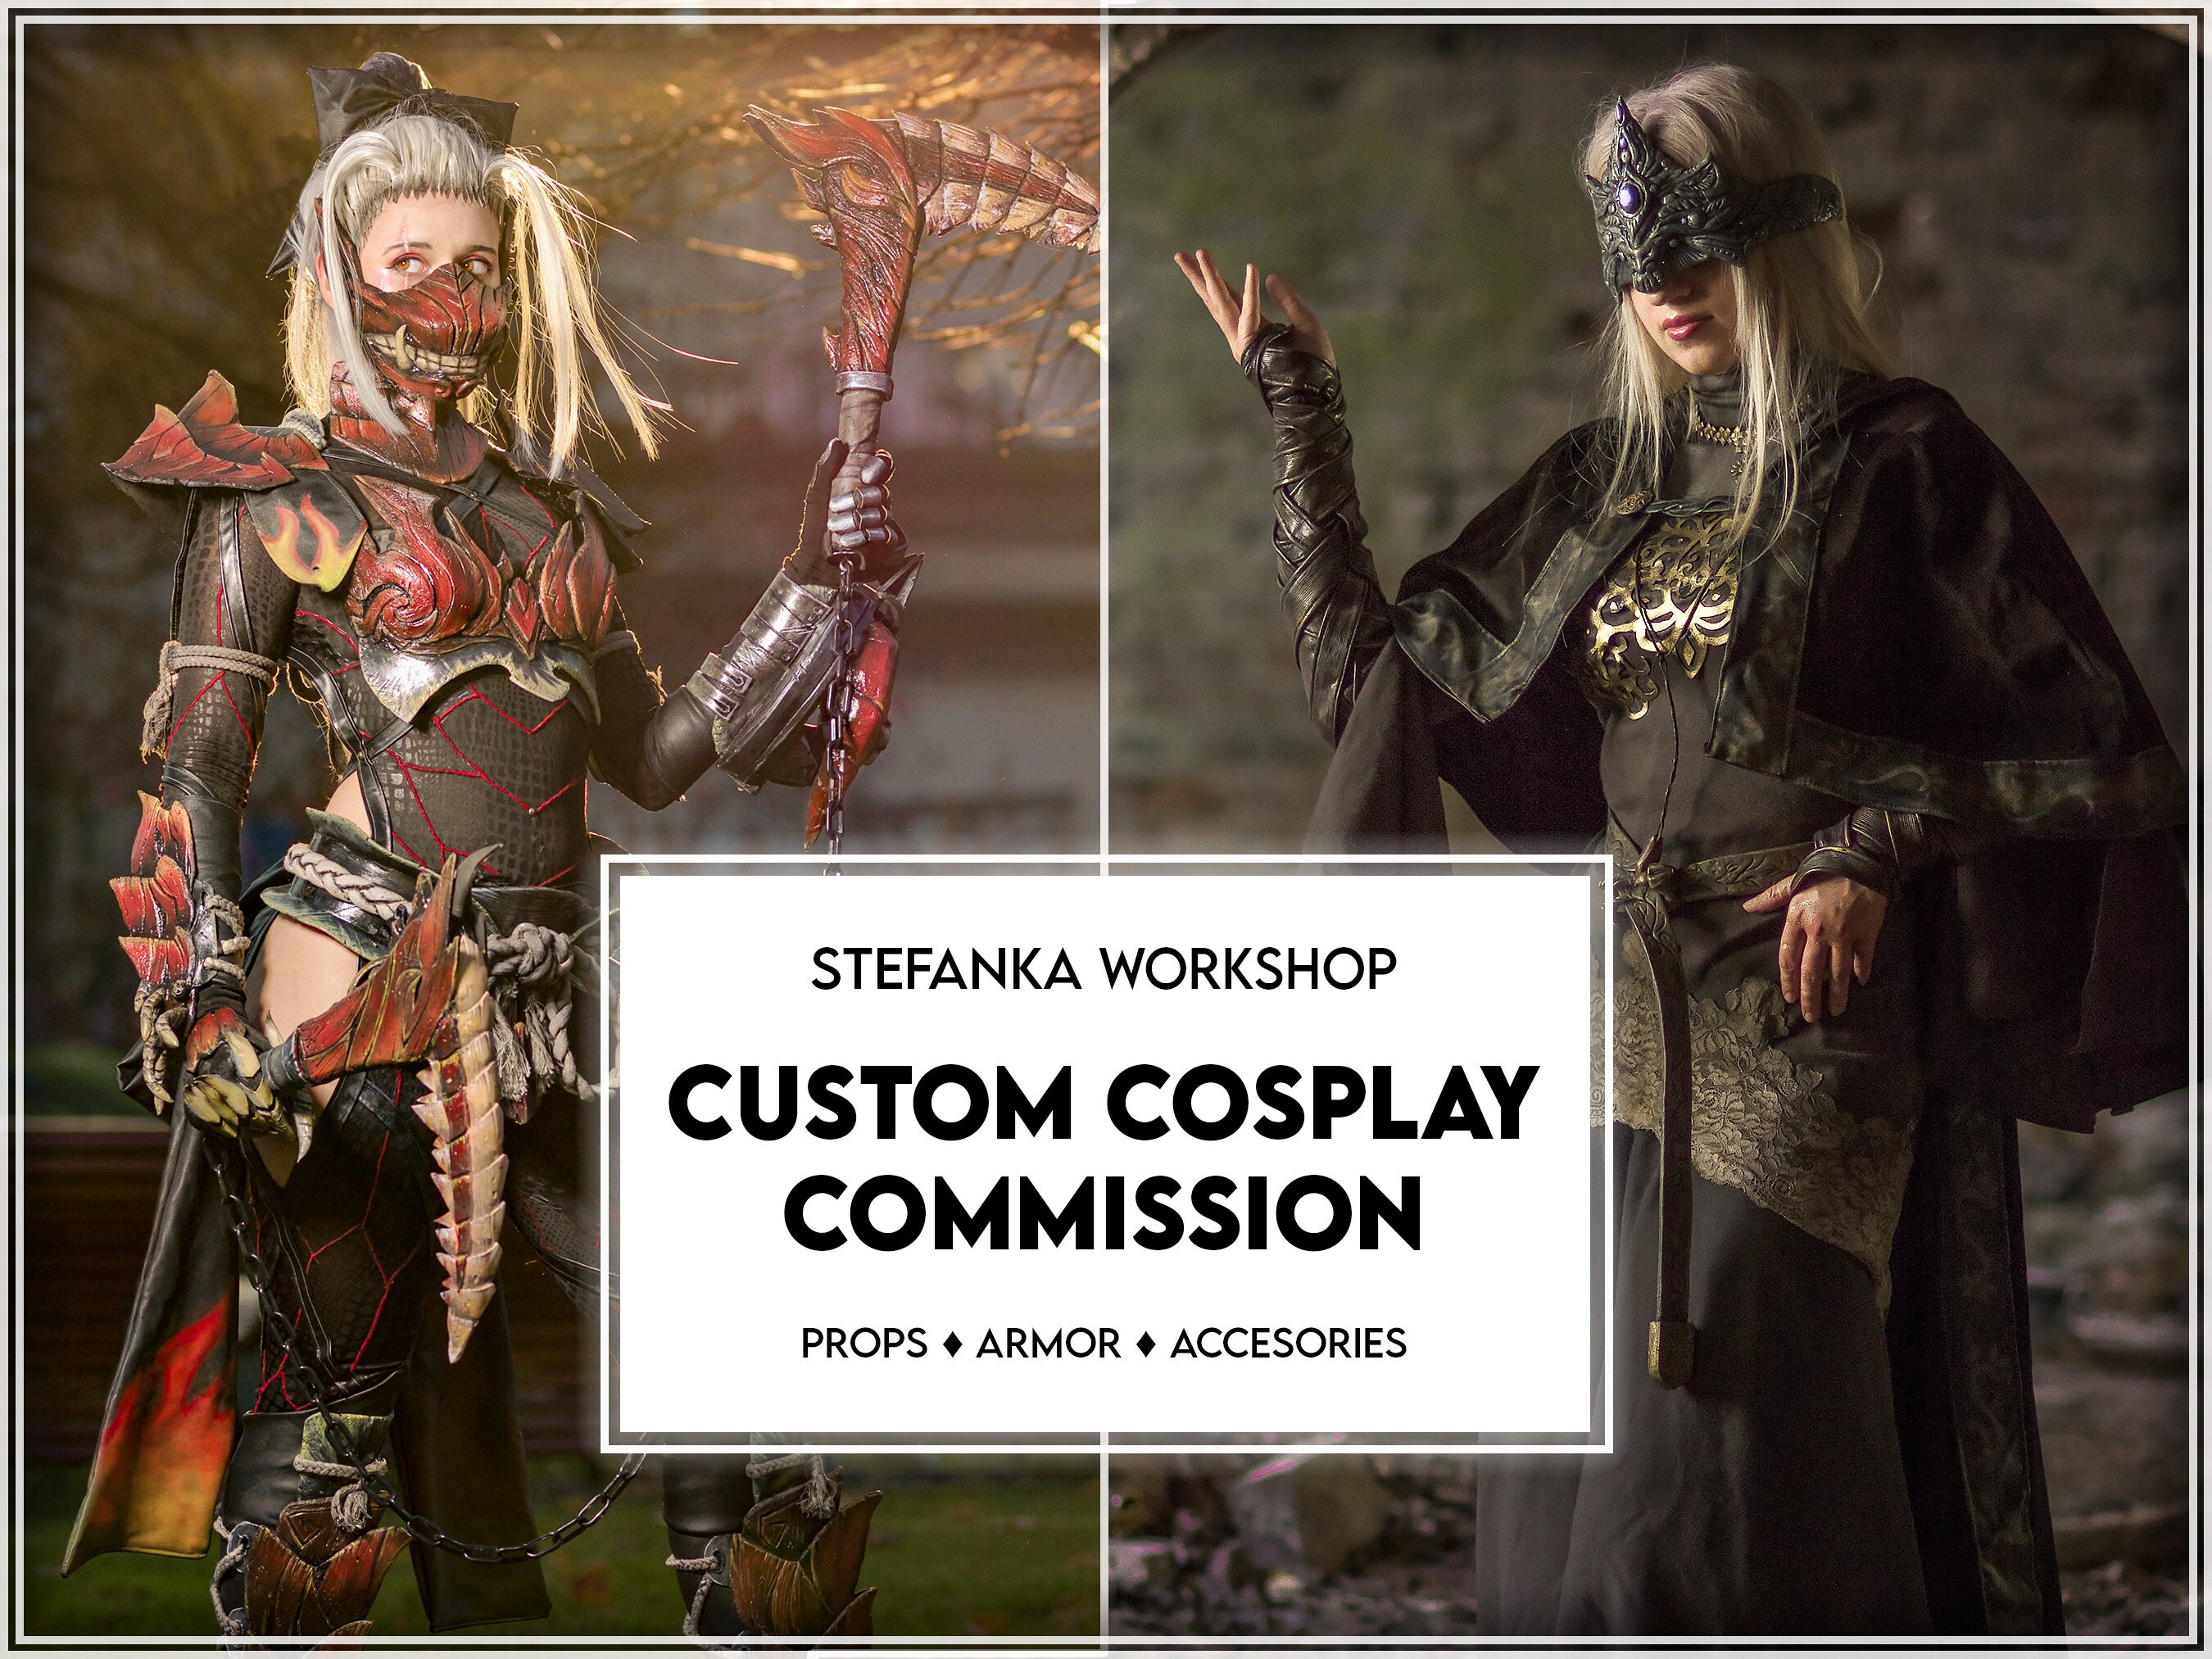 3d print cosplay commission